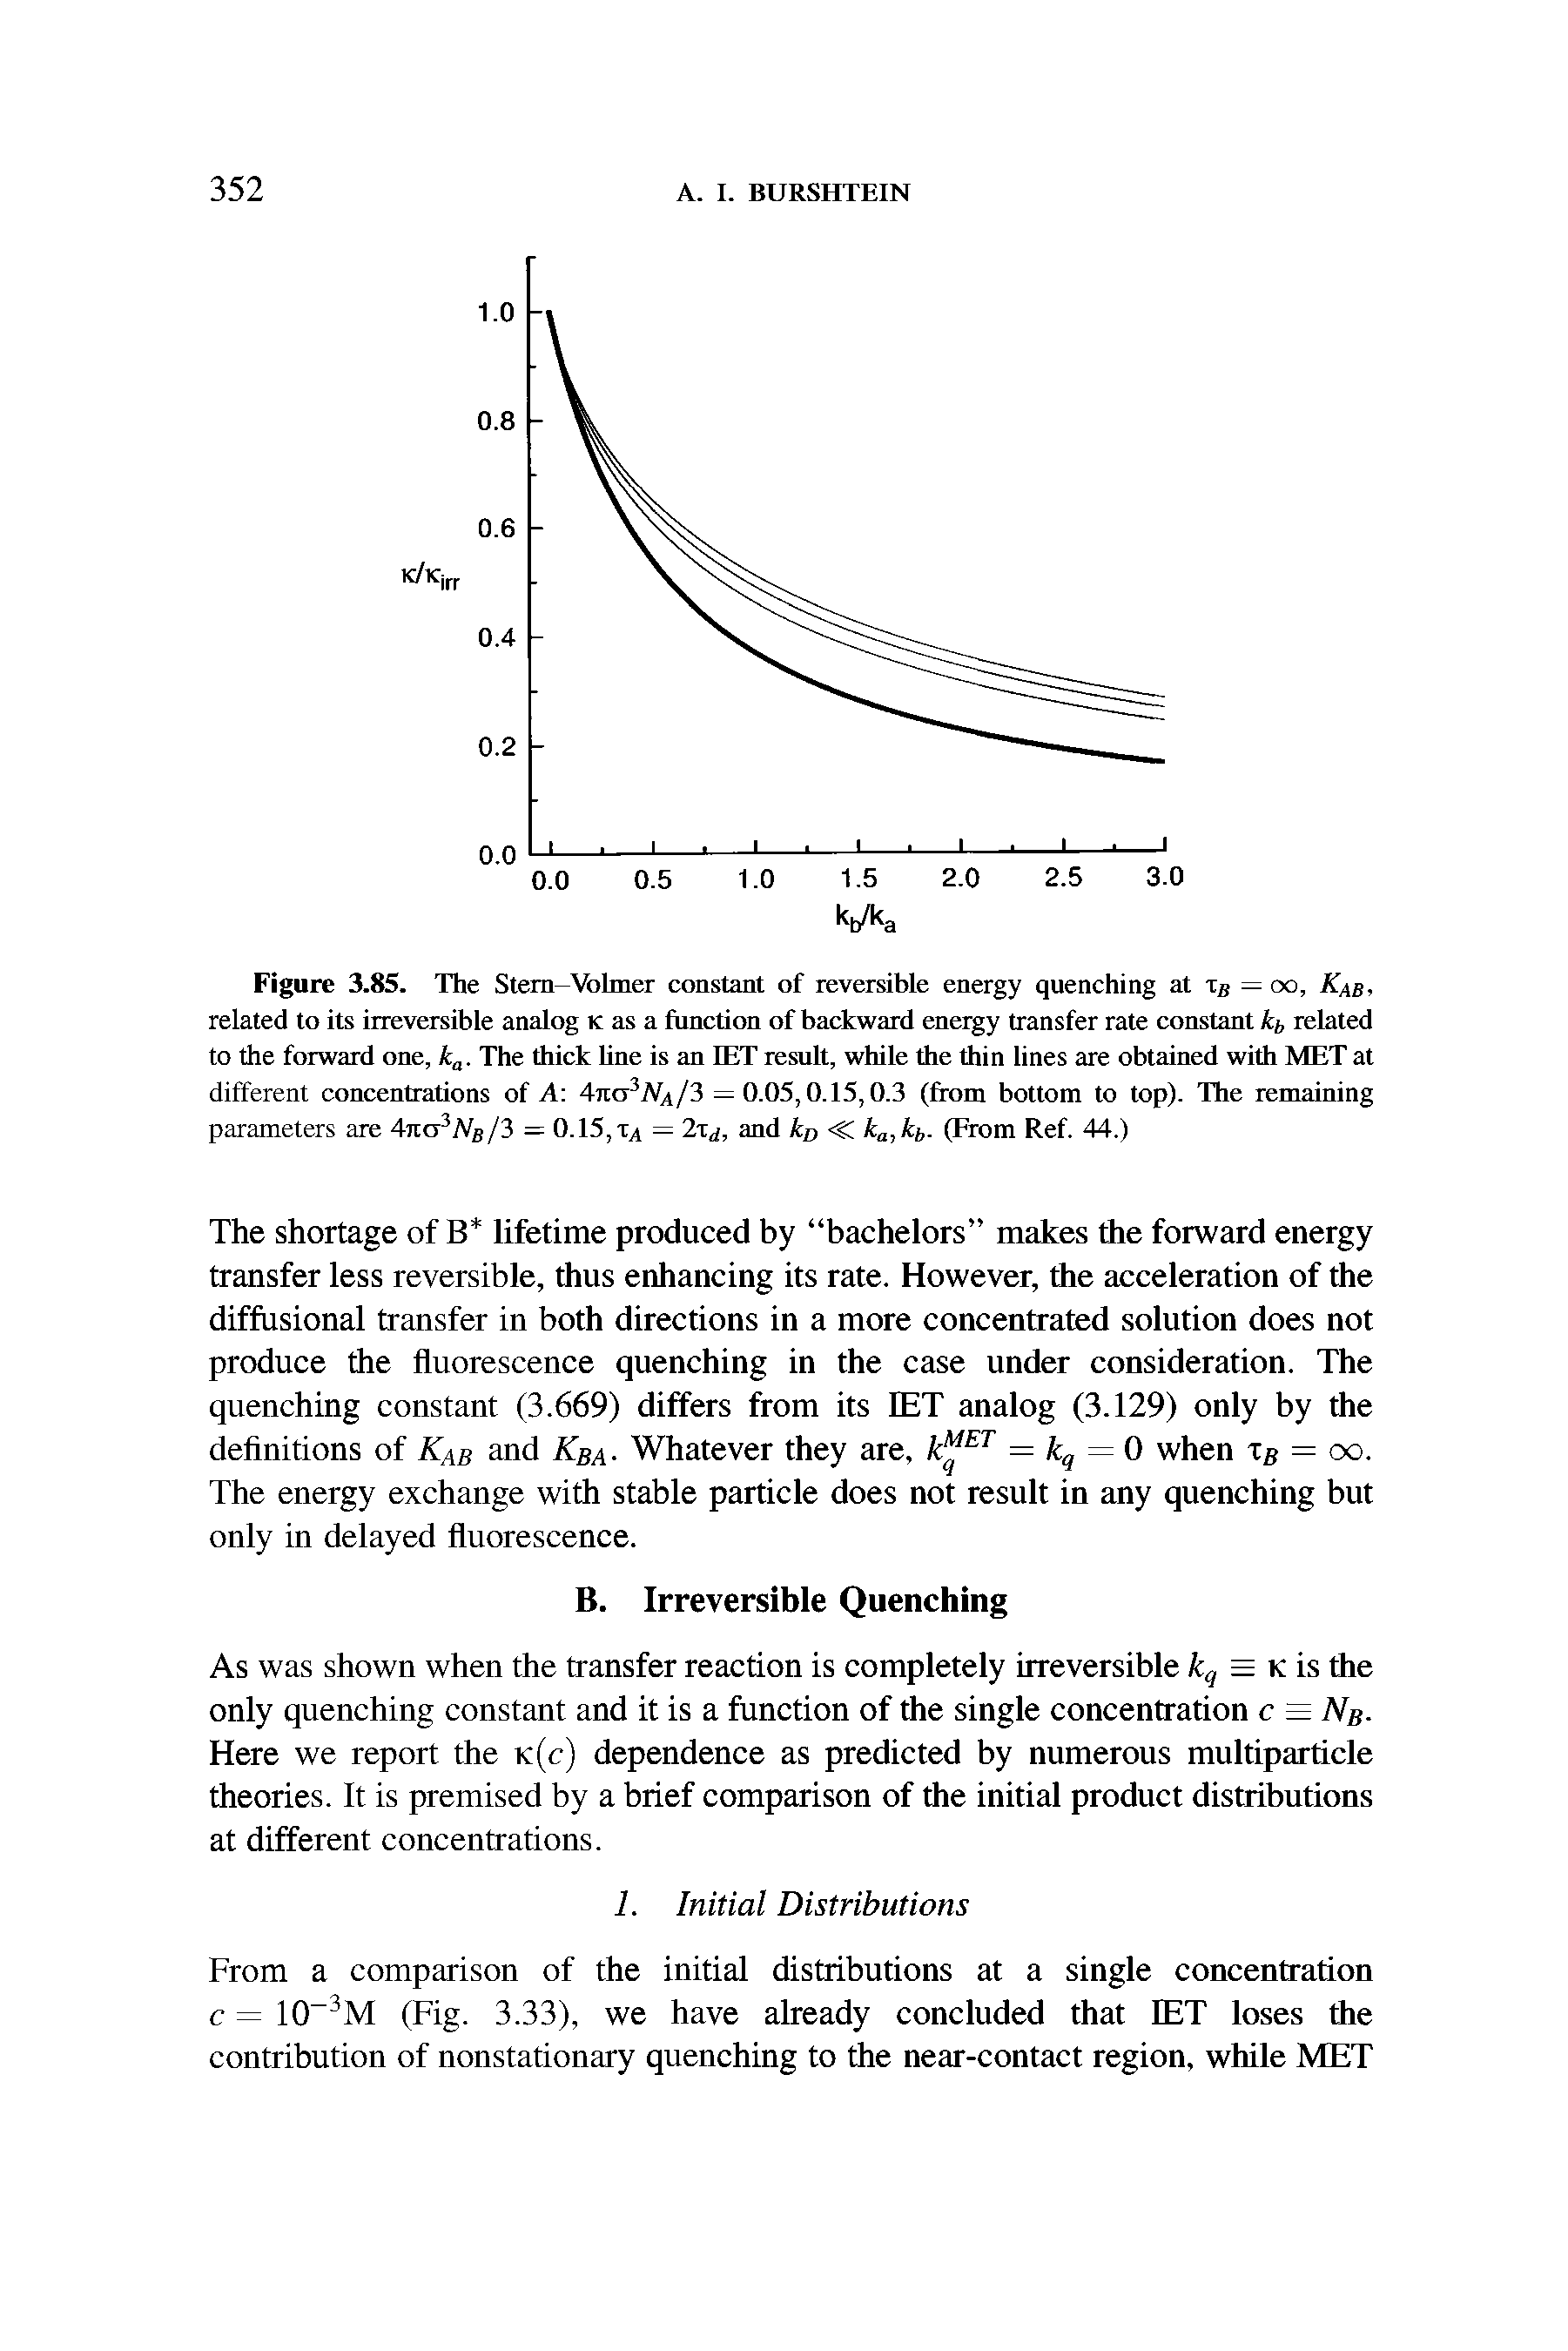 Figure 3.85. The Stem—Volmer constant of reversible energy quenching at zB = oo, A -/ . related to its irreversible analog K as a function of backward energy transfer rate constant kb related to the forward one, ka. The thick line is an IET result, while the thin lines are obtained with MET at different concentrations of A 4na3NA/3 = 0.05,0.15,0.3 (from bottom to top). The remaining parameters are 47ia3Afi/3 = 0.15, = 2t(/, and kD <C ka,kb. (From Ref. 44.)...